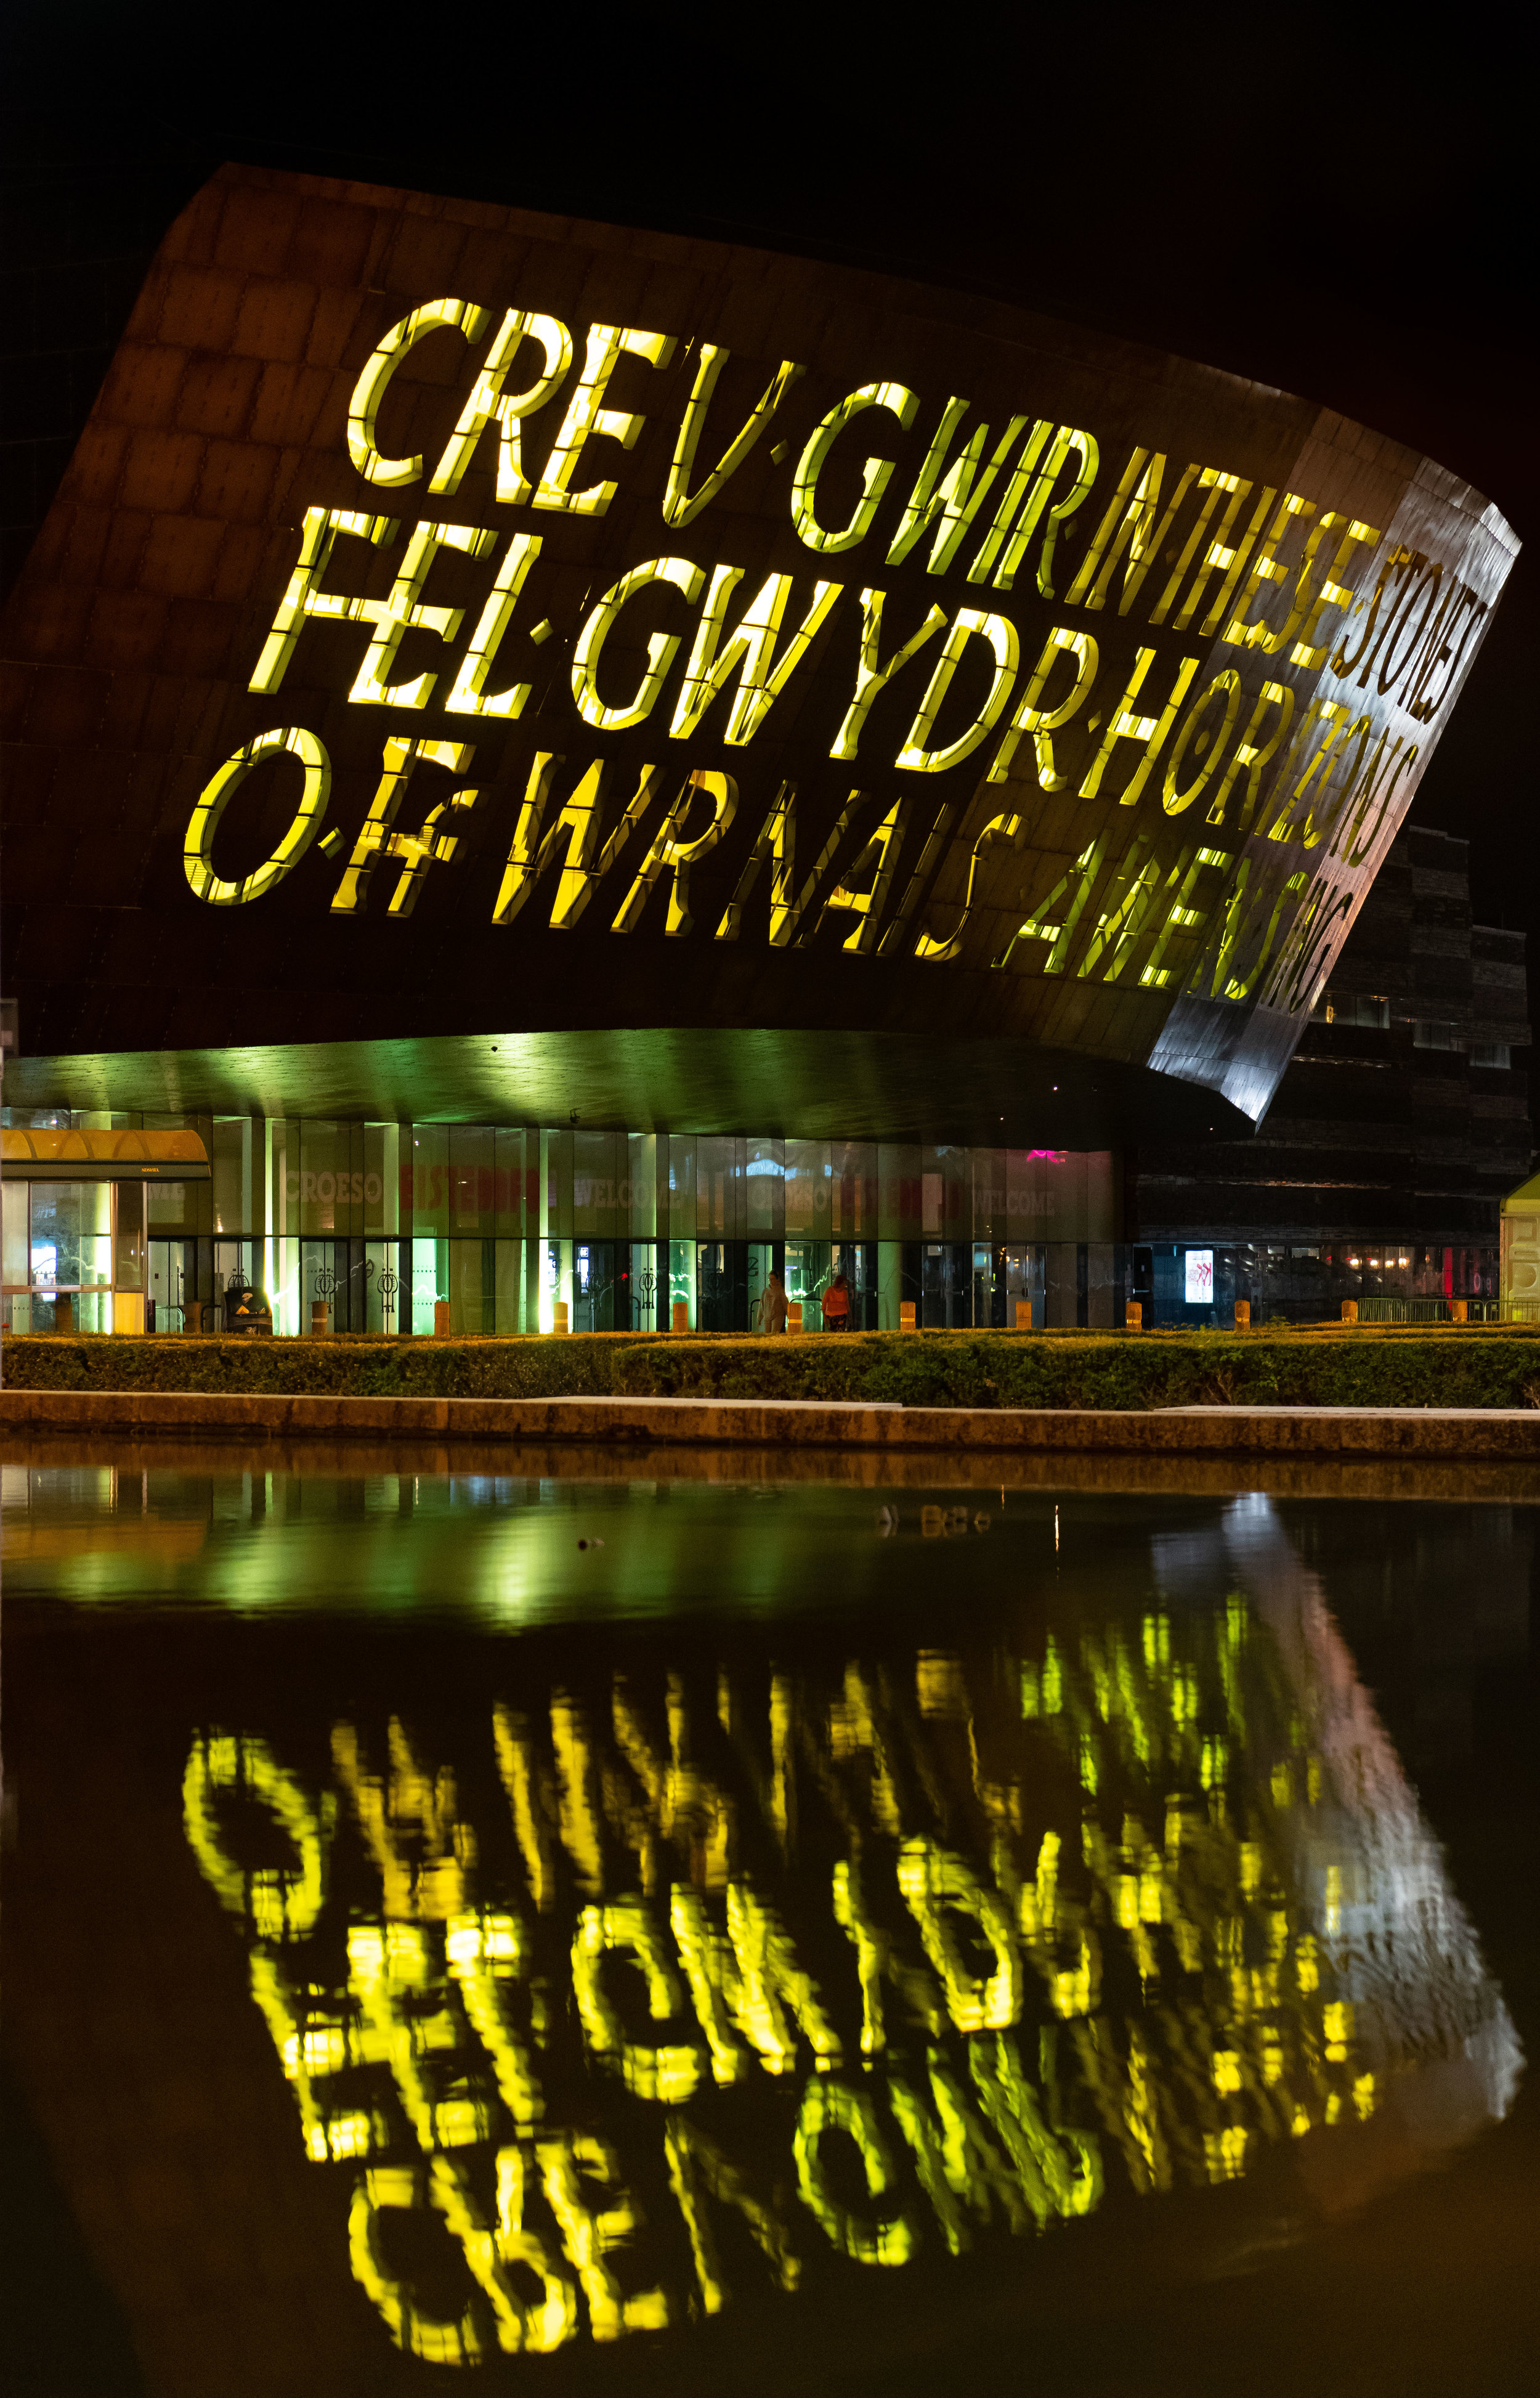  CARDIFF, WALES - JULY 29: The Wales Millennium Centre, Wales' national centre for performing arts, is seen illuminated in yellow light following cyclist Geraint Thomas' victory in the Tour De France on July 29, 2018 in Cardiff, Wales. Team Sky's Ger